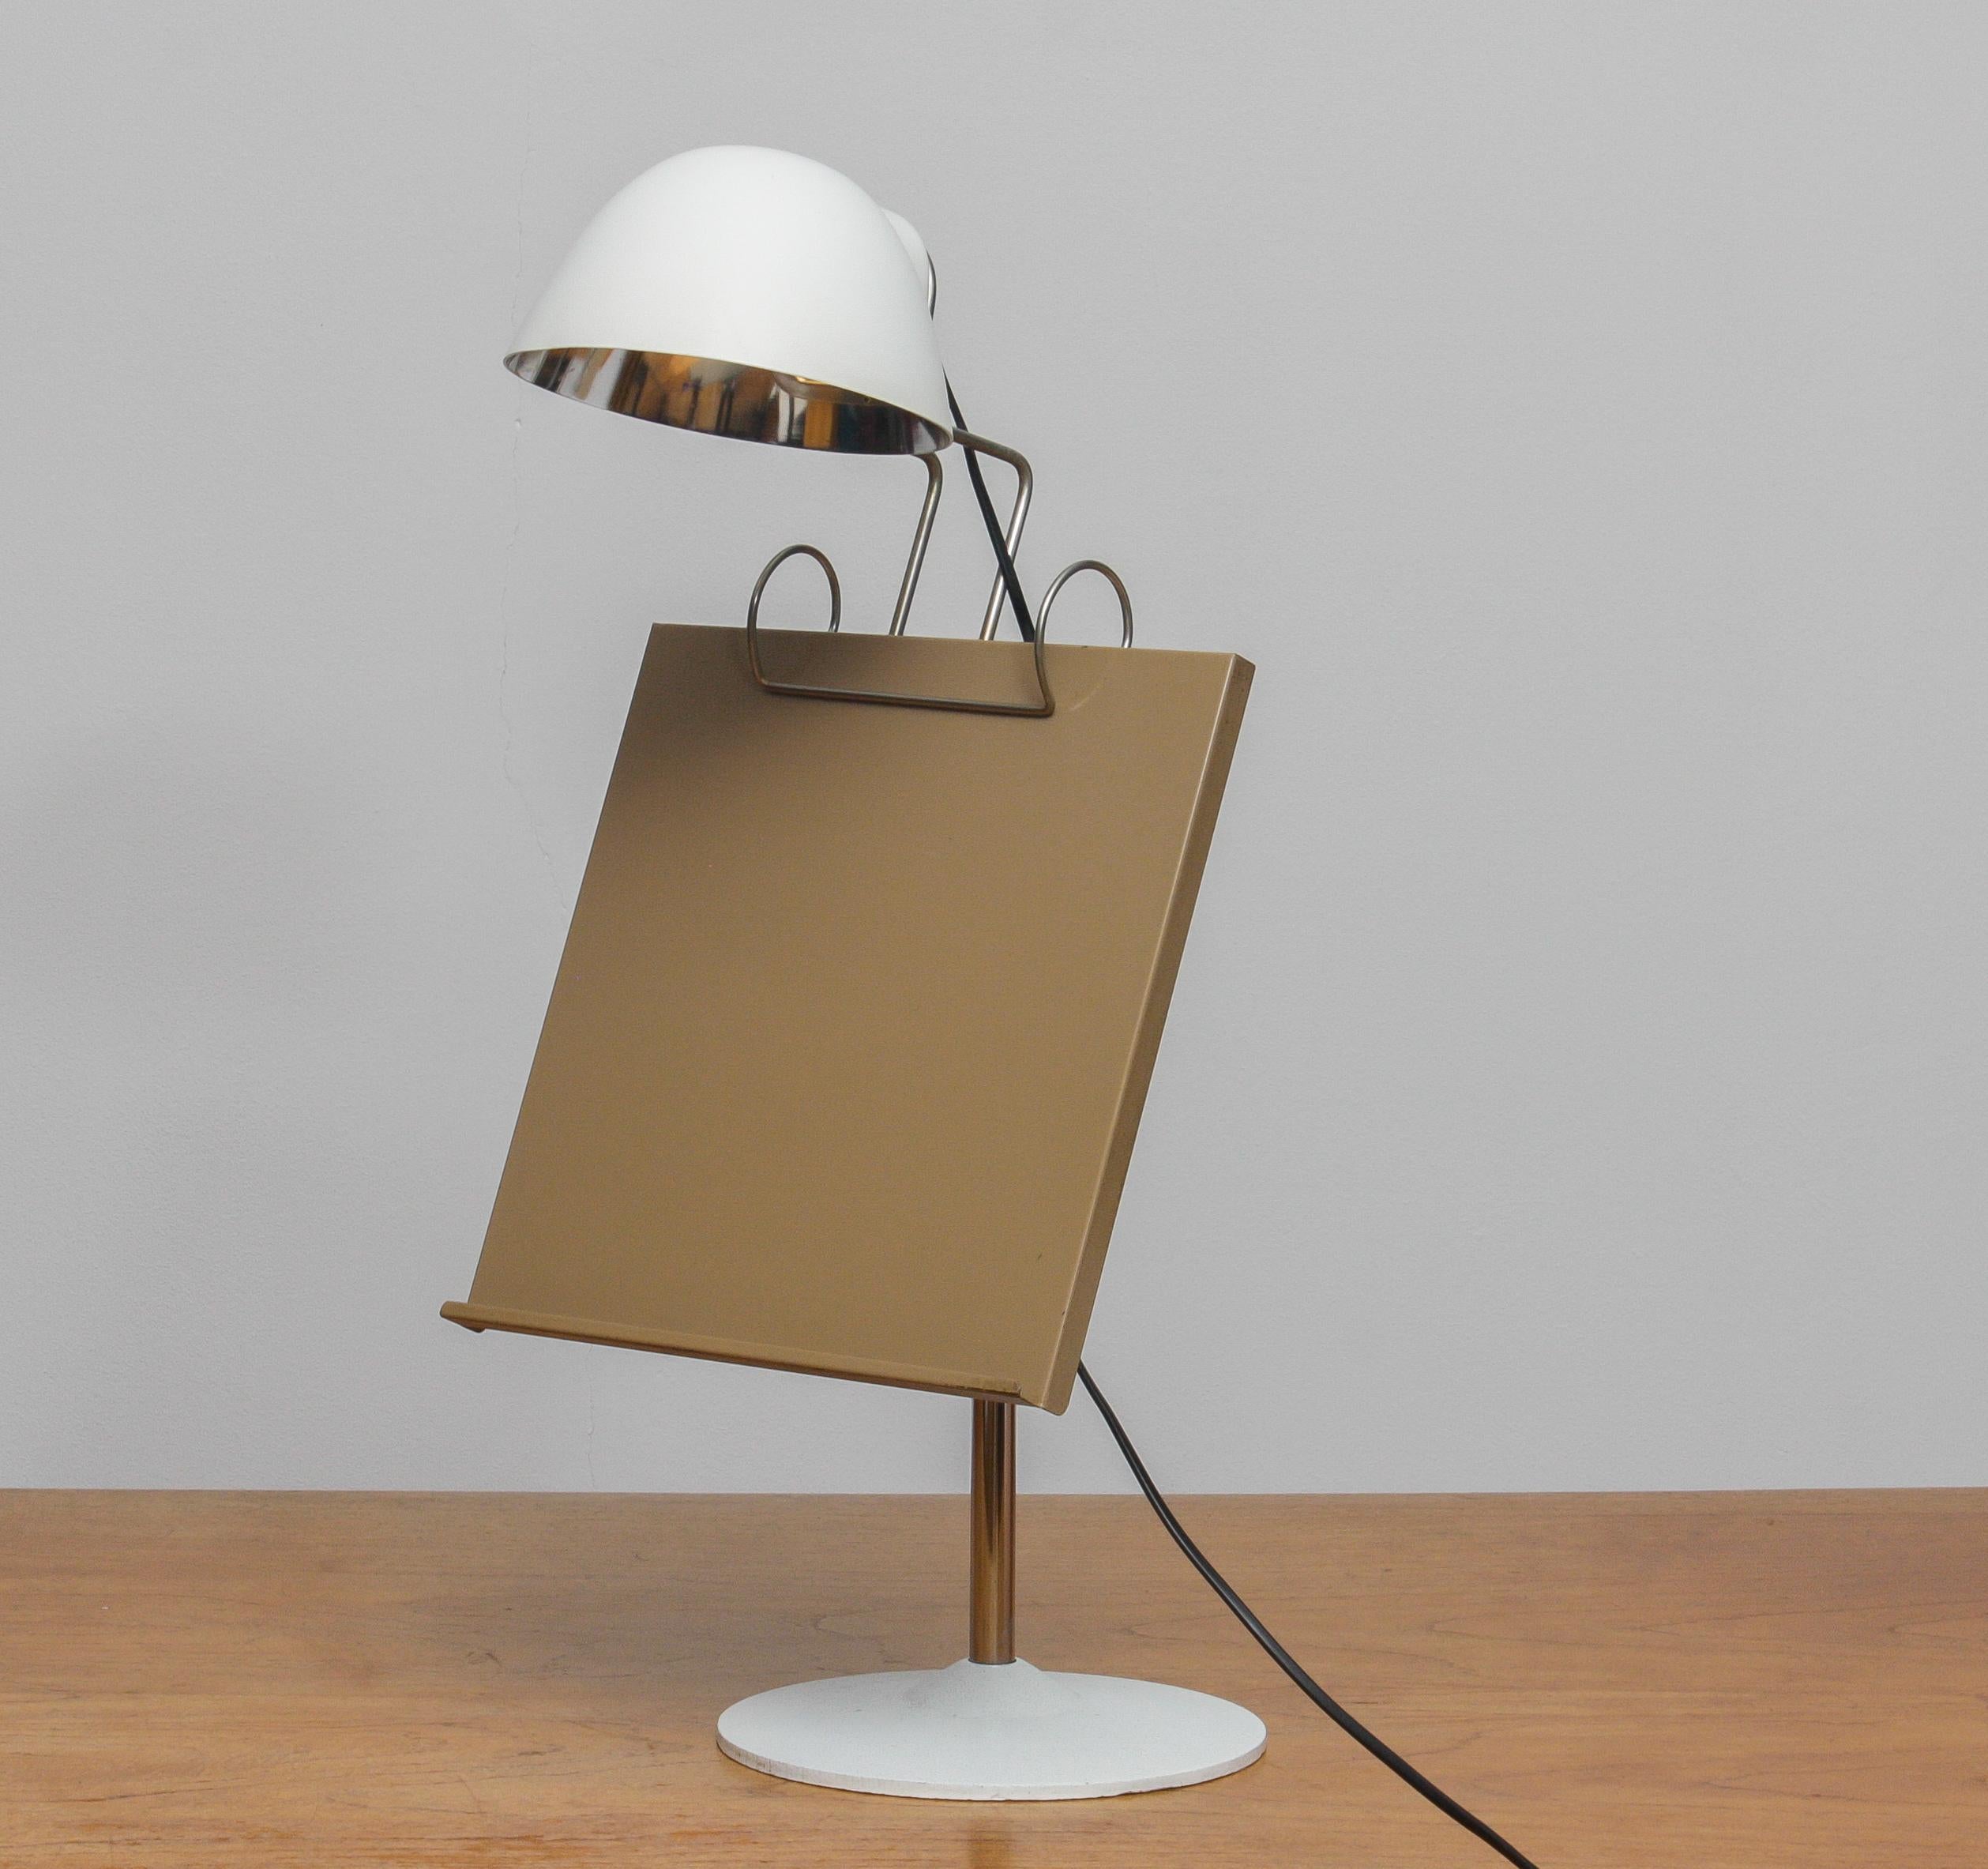 Extremely rare and beautiful table lamp with book stand made by Falkenberg Belysning in Sweden.
The table lamp is perfect condition and uses one E14 / E17 bulb and suits 110 and 230 volts.

Measures: The height is adjustable from 55cm / 21 inch up